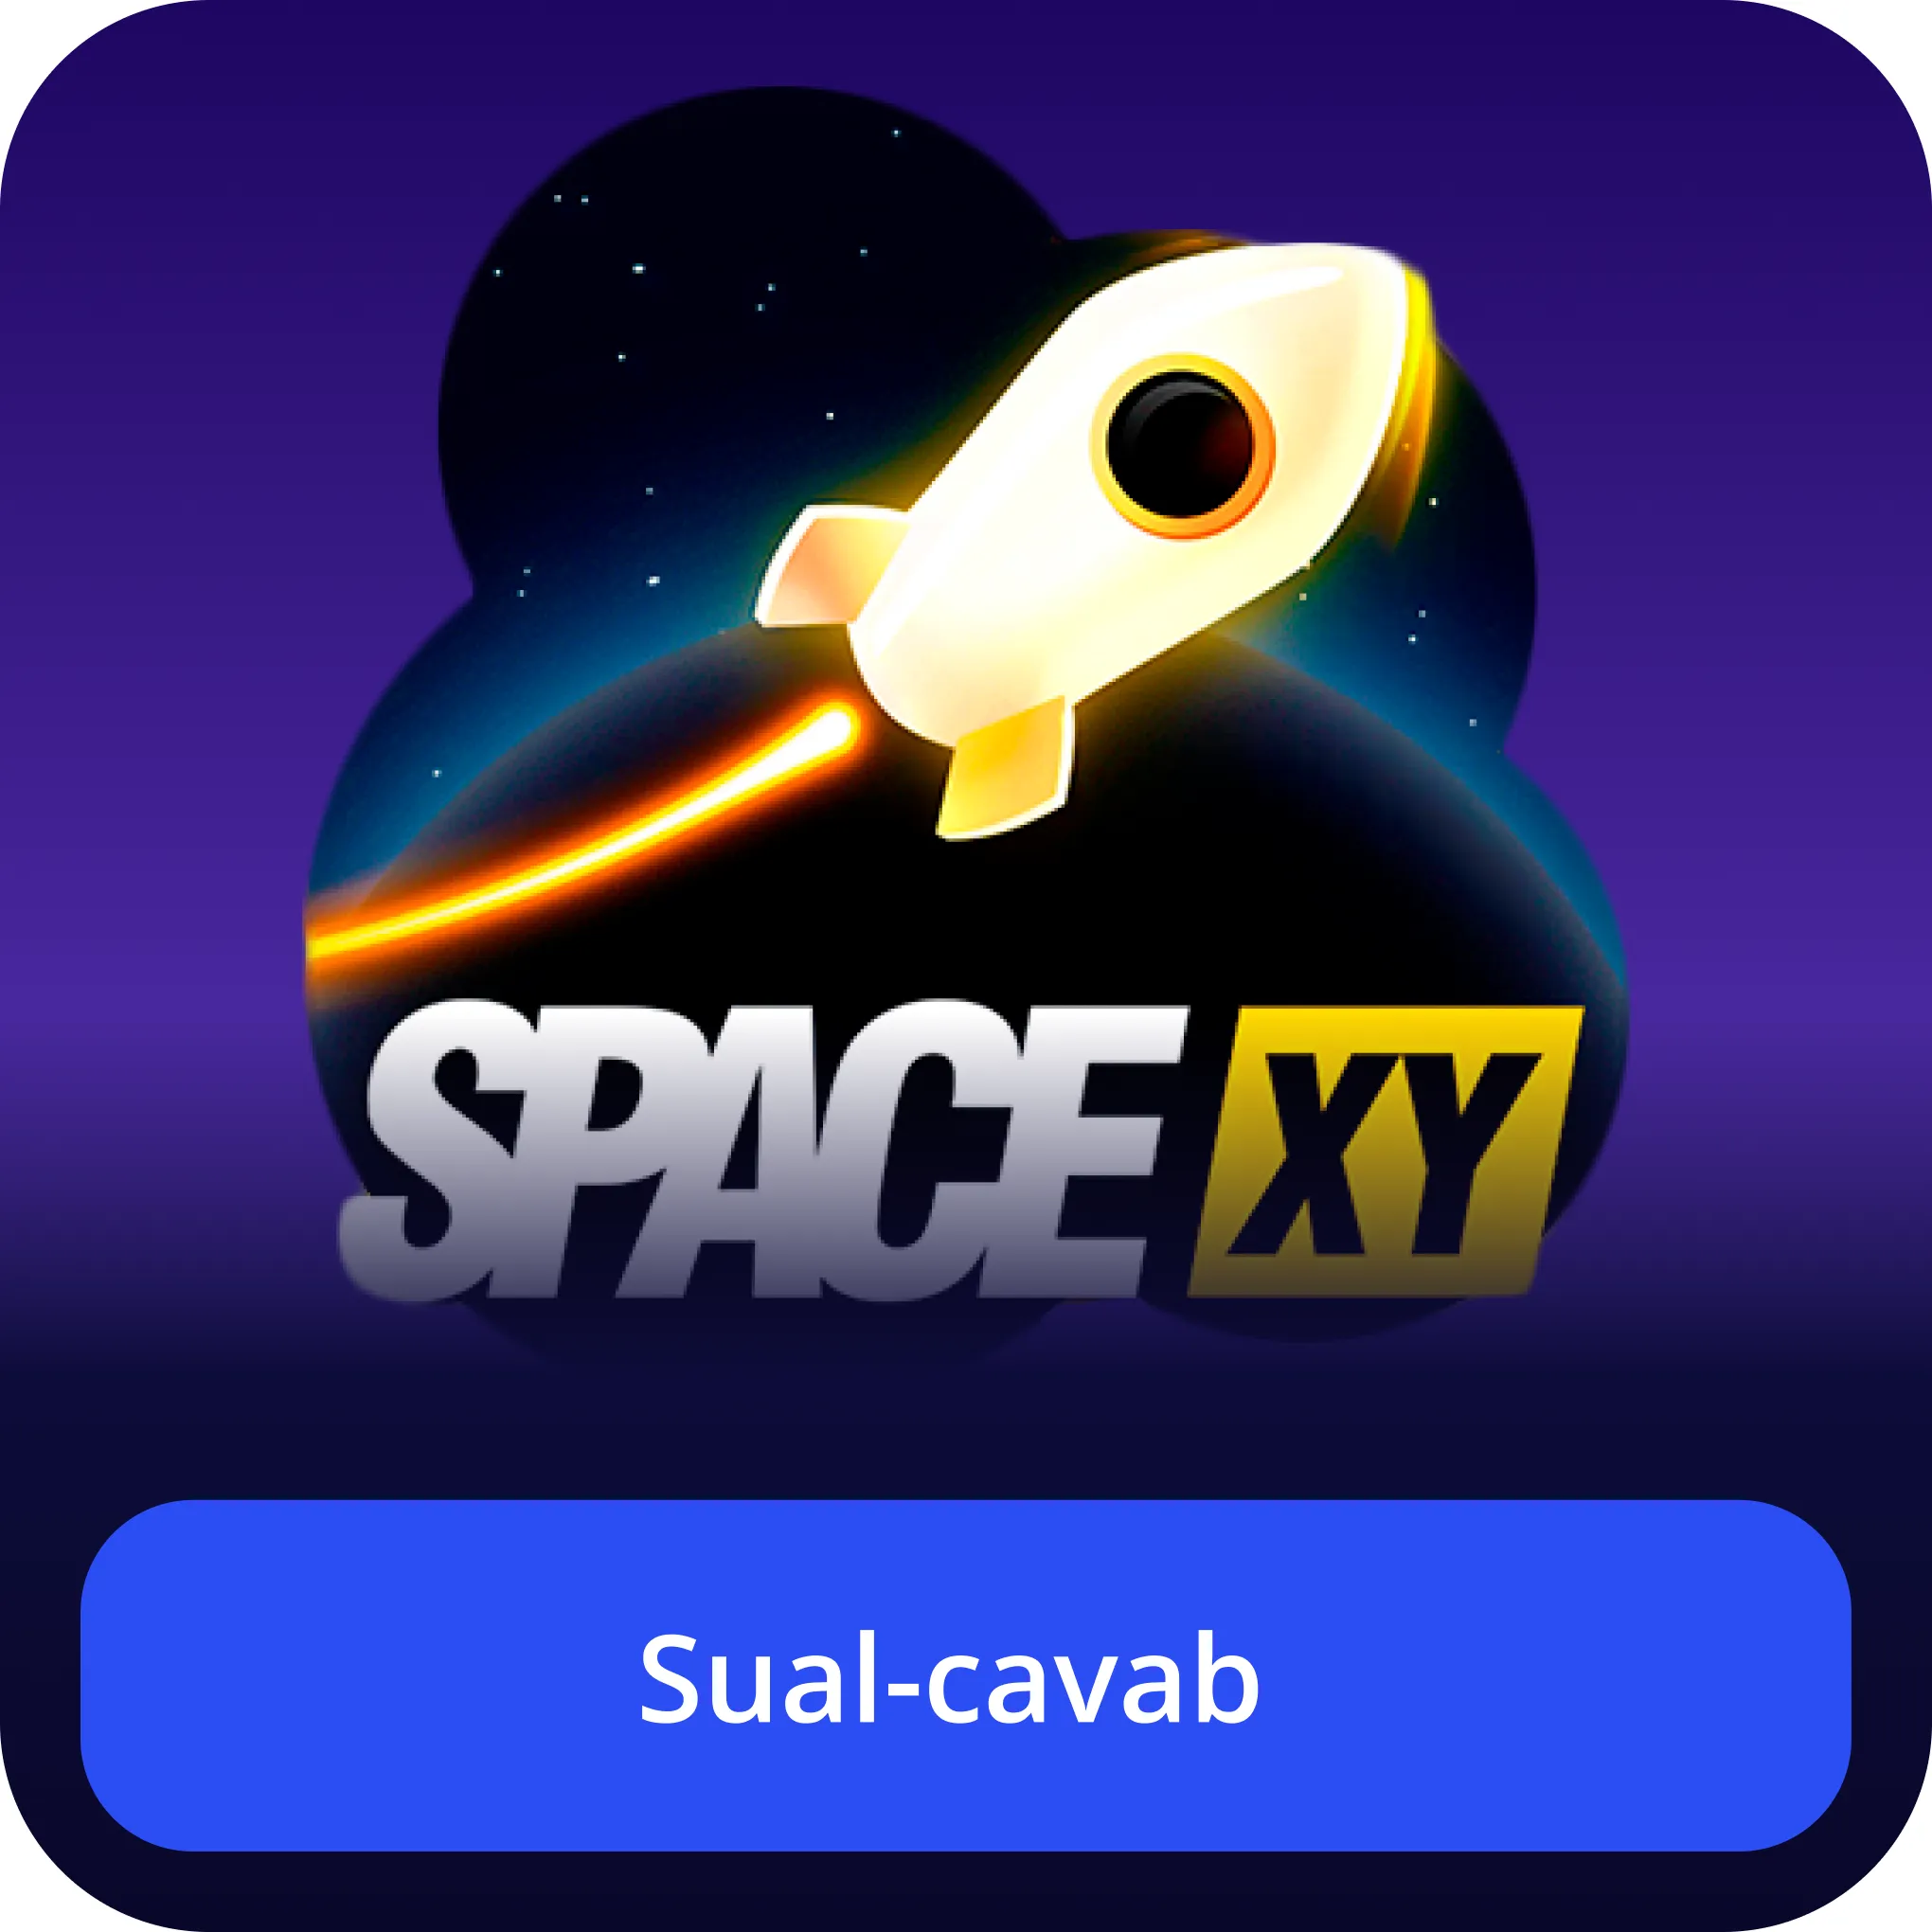 sual-cavab space xy